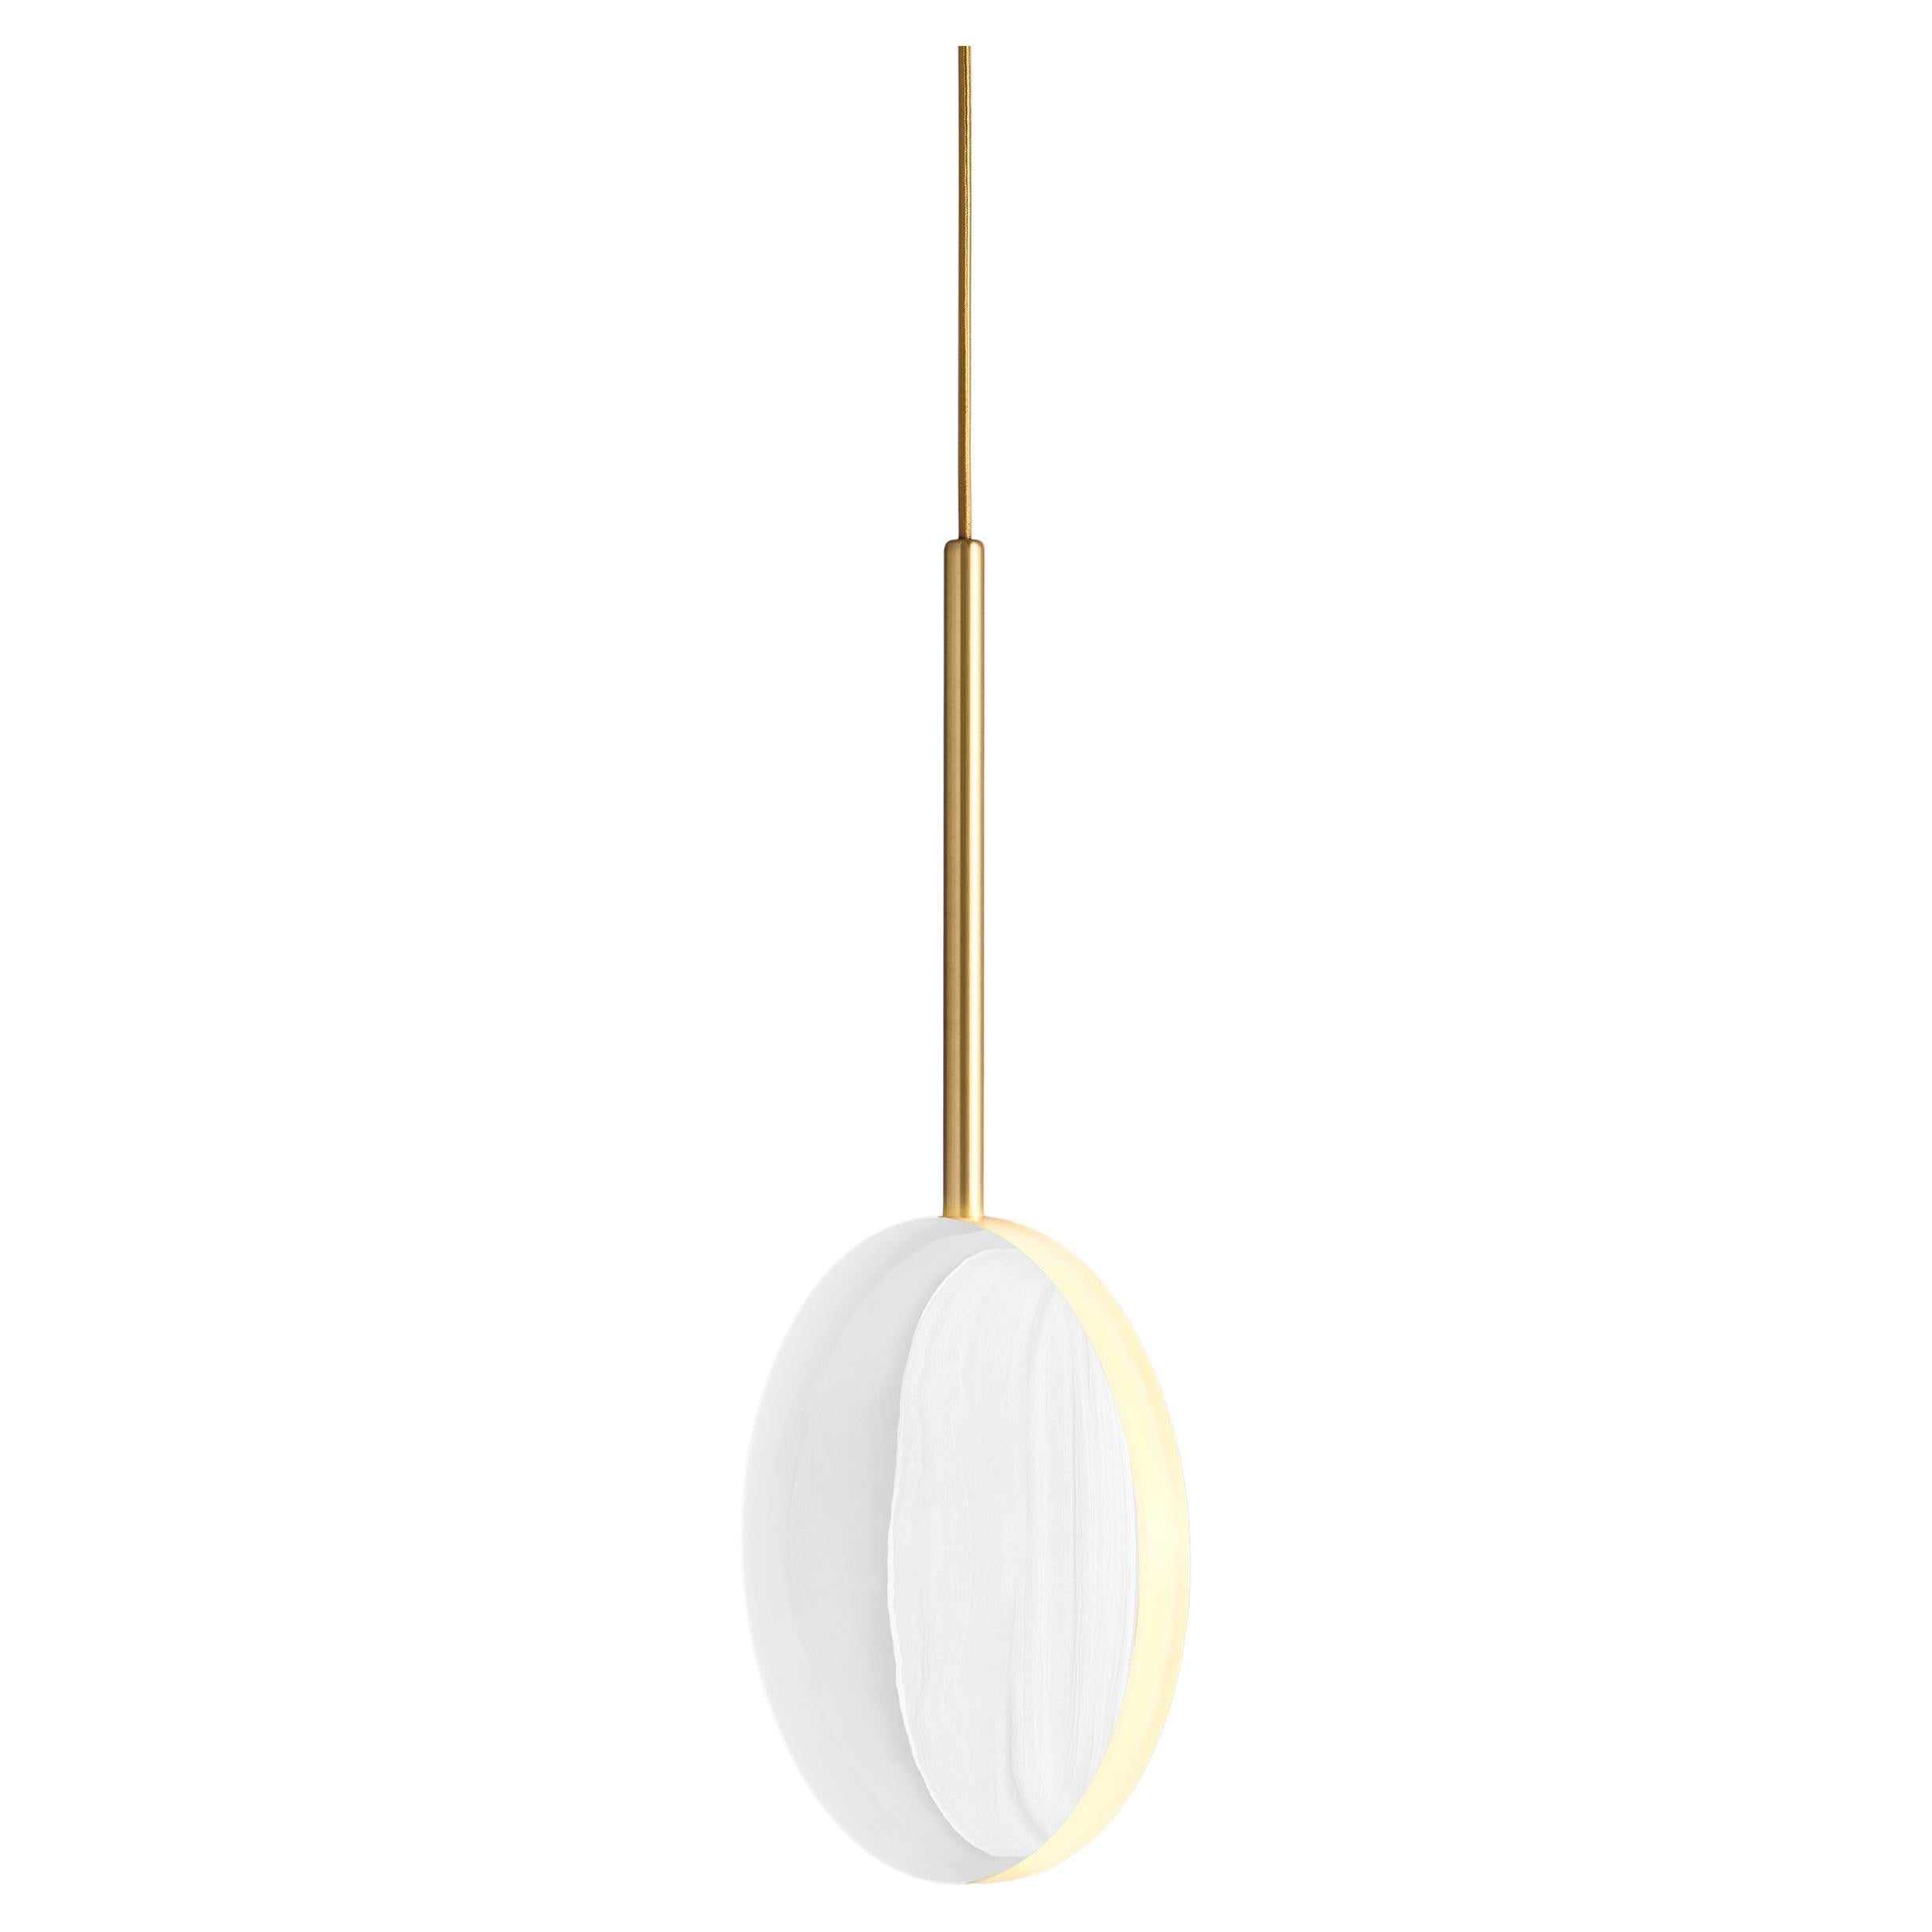 Cosmic 'Comet Pendant Purion' Handmade White Piano Lacquered Brass Ceiling Light